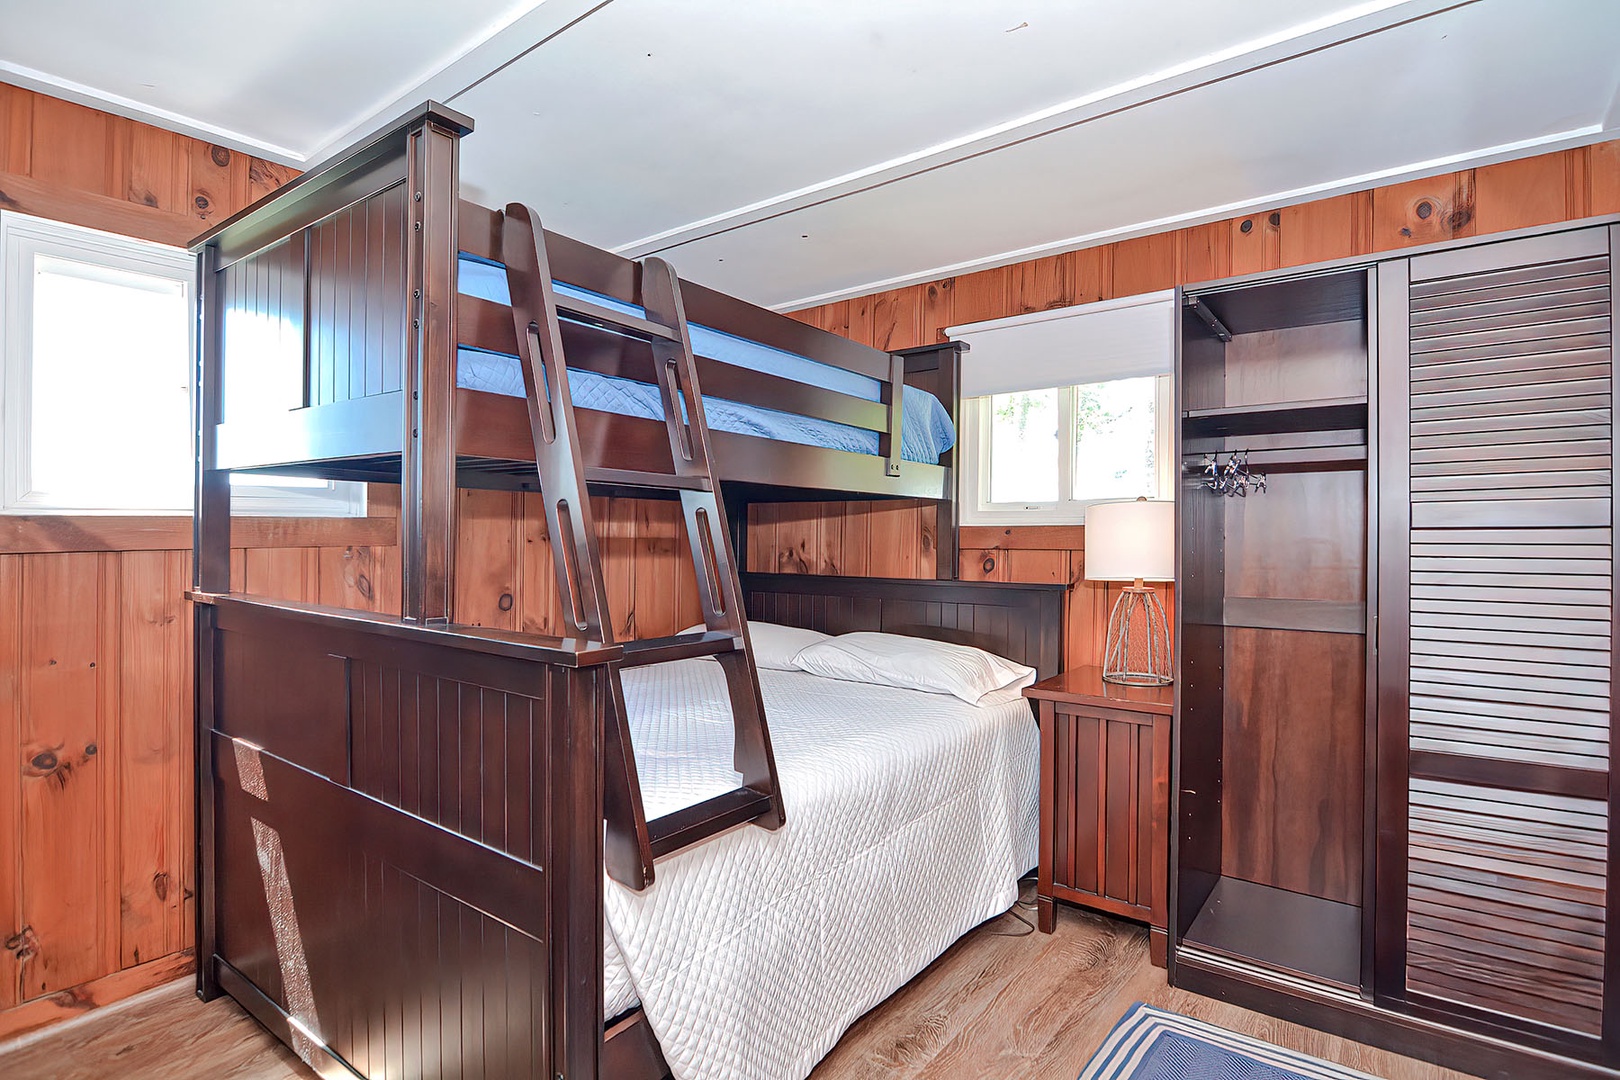 BR 2: This room has a Full bed and Twin bunk bed.